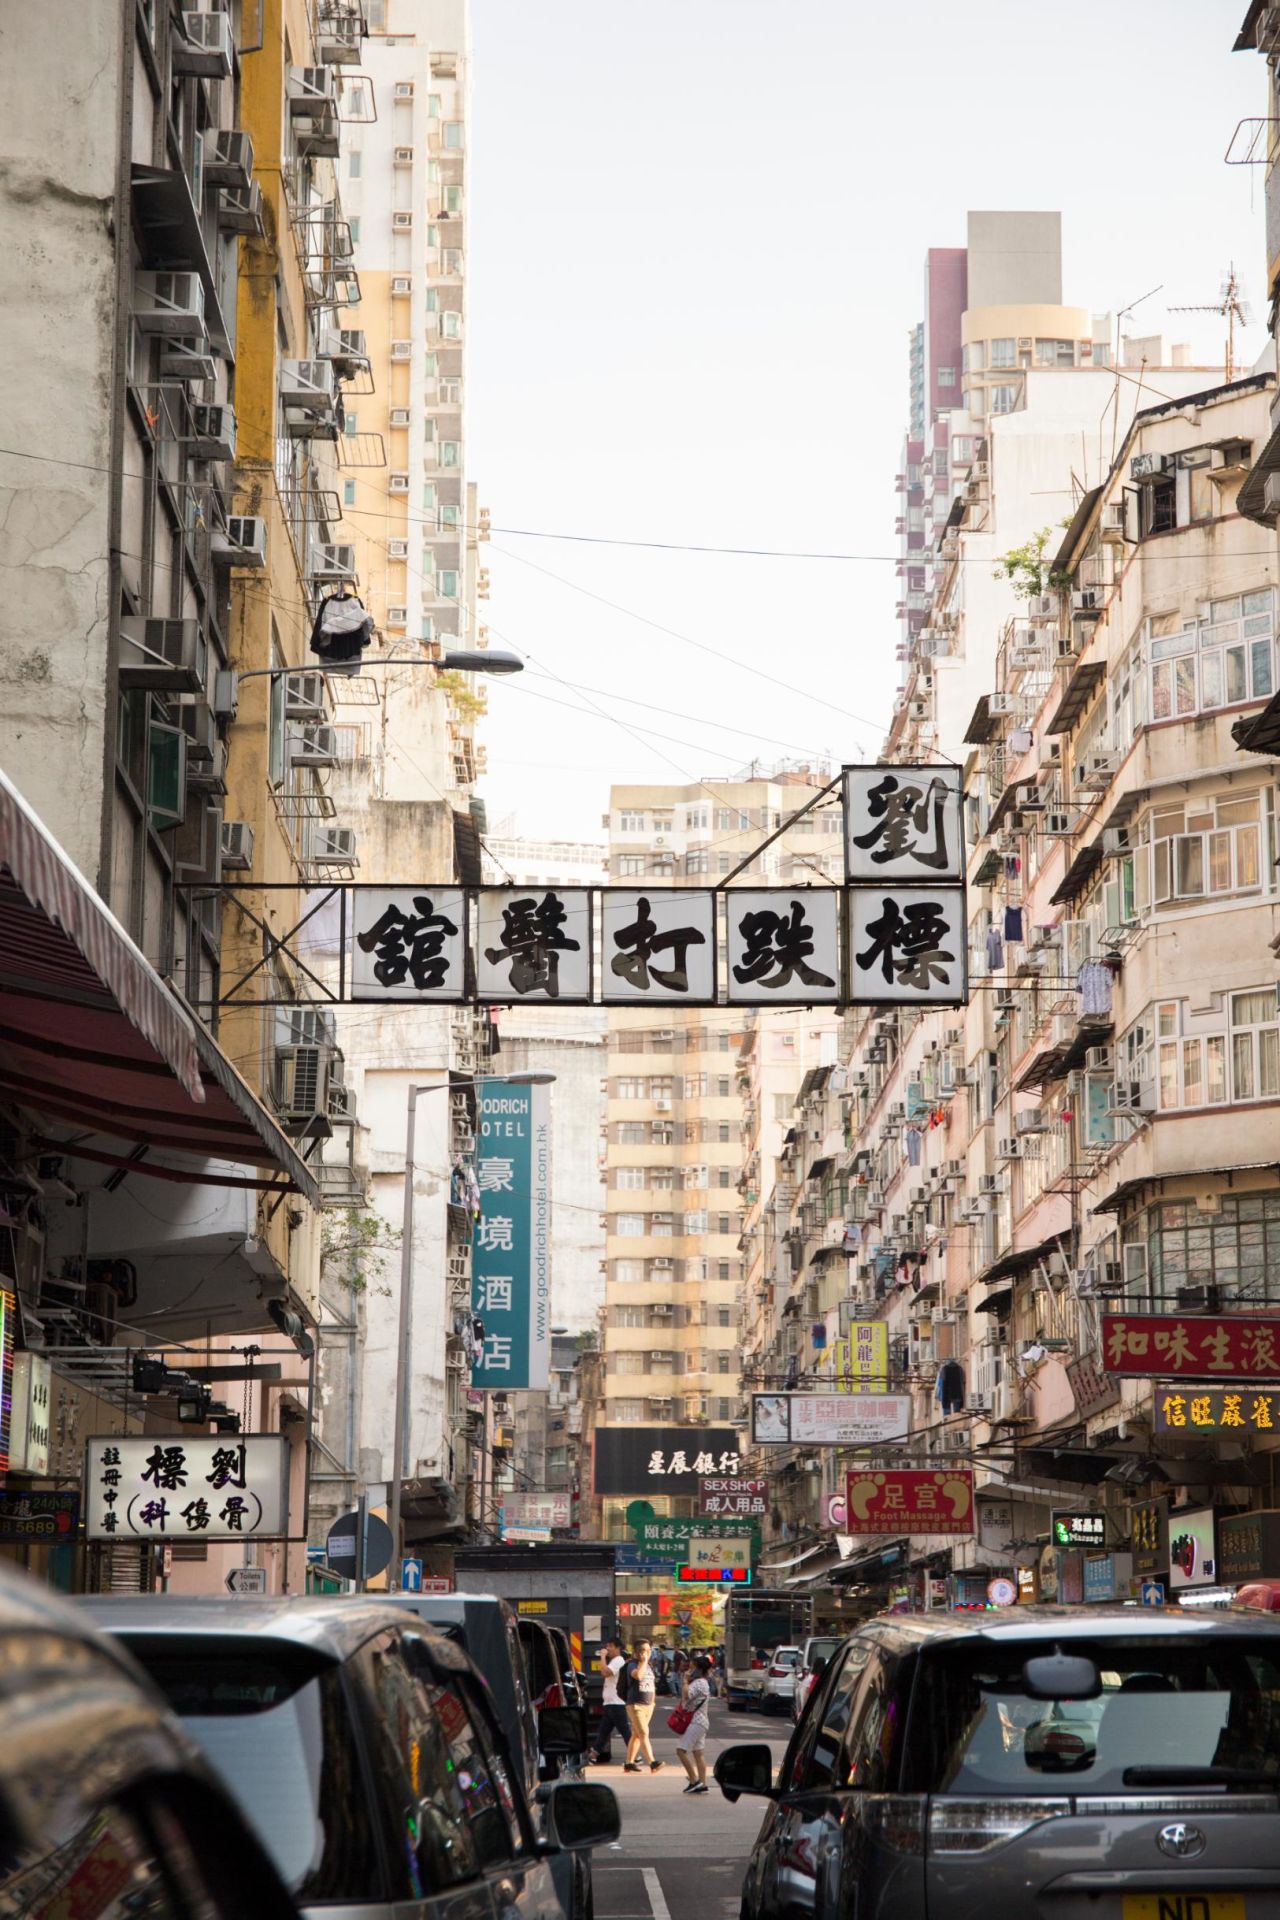 A black and white sign -- written in the Beiwei Kaishu style -- draws attention to a chiropractor's clinic in Hong Kong's Yau Ma Tei district.